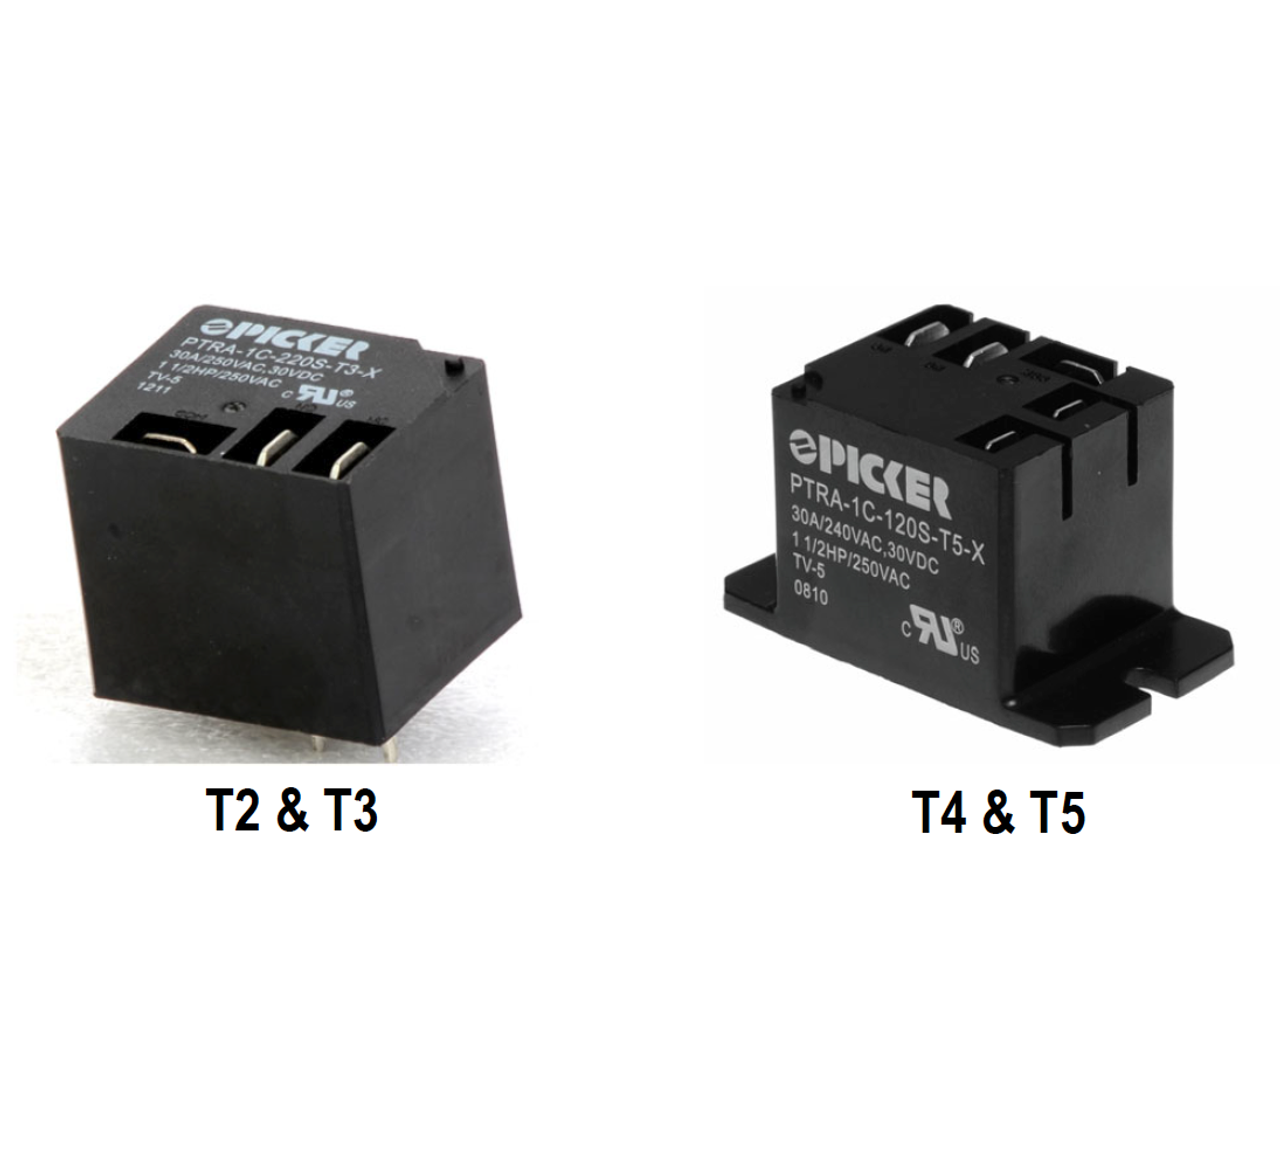 Picker PTRA-1A-110CT-T3-X Power Relays